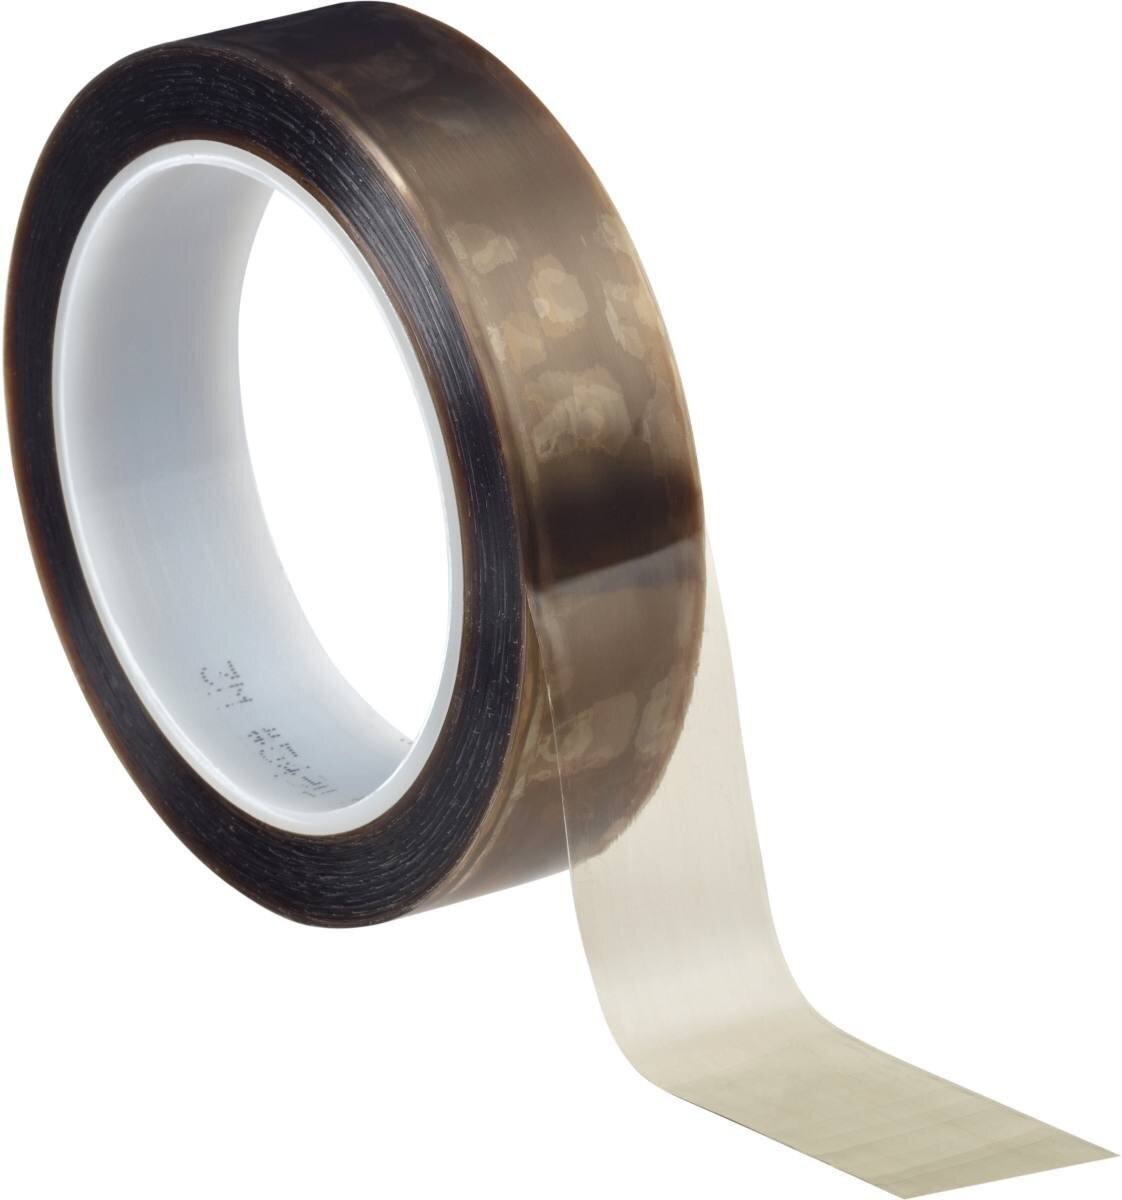 3M 5491 PTFE extruded film adhesive tape 60.3mmx33m, 0.17mm, silicone